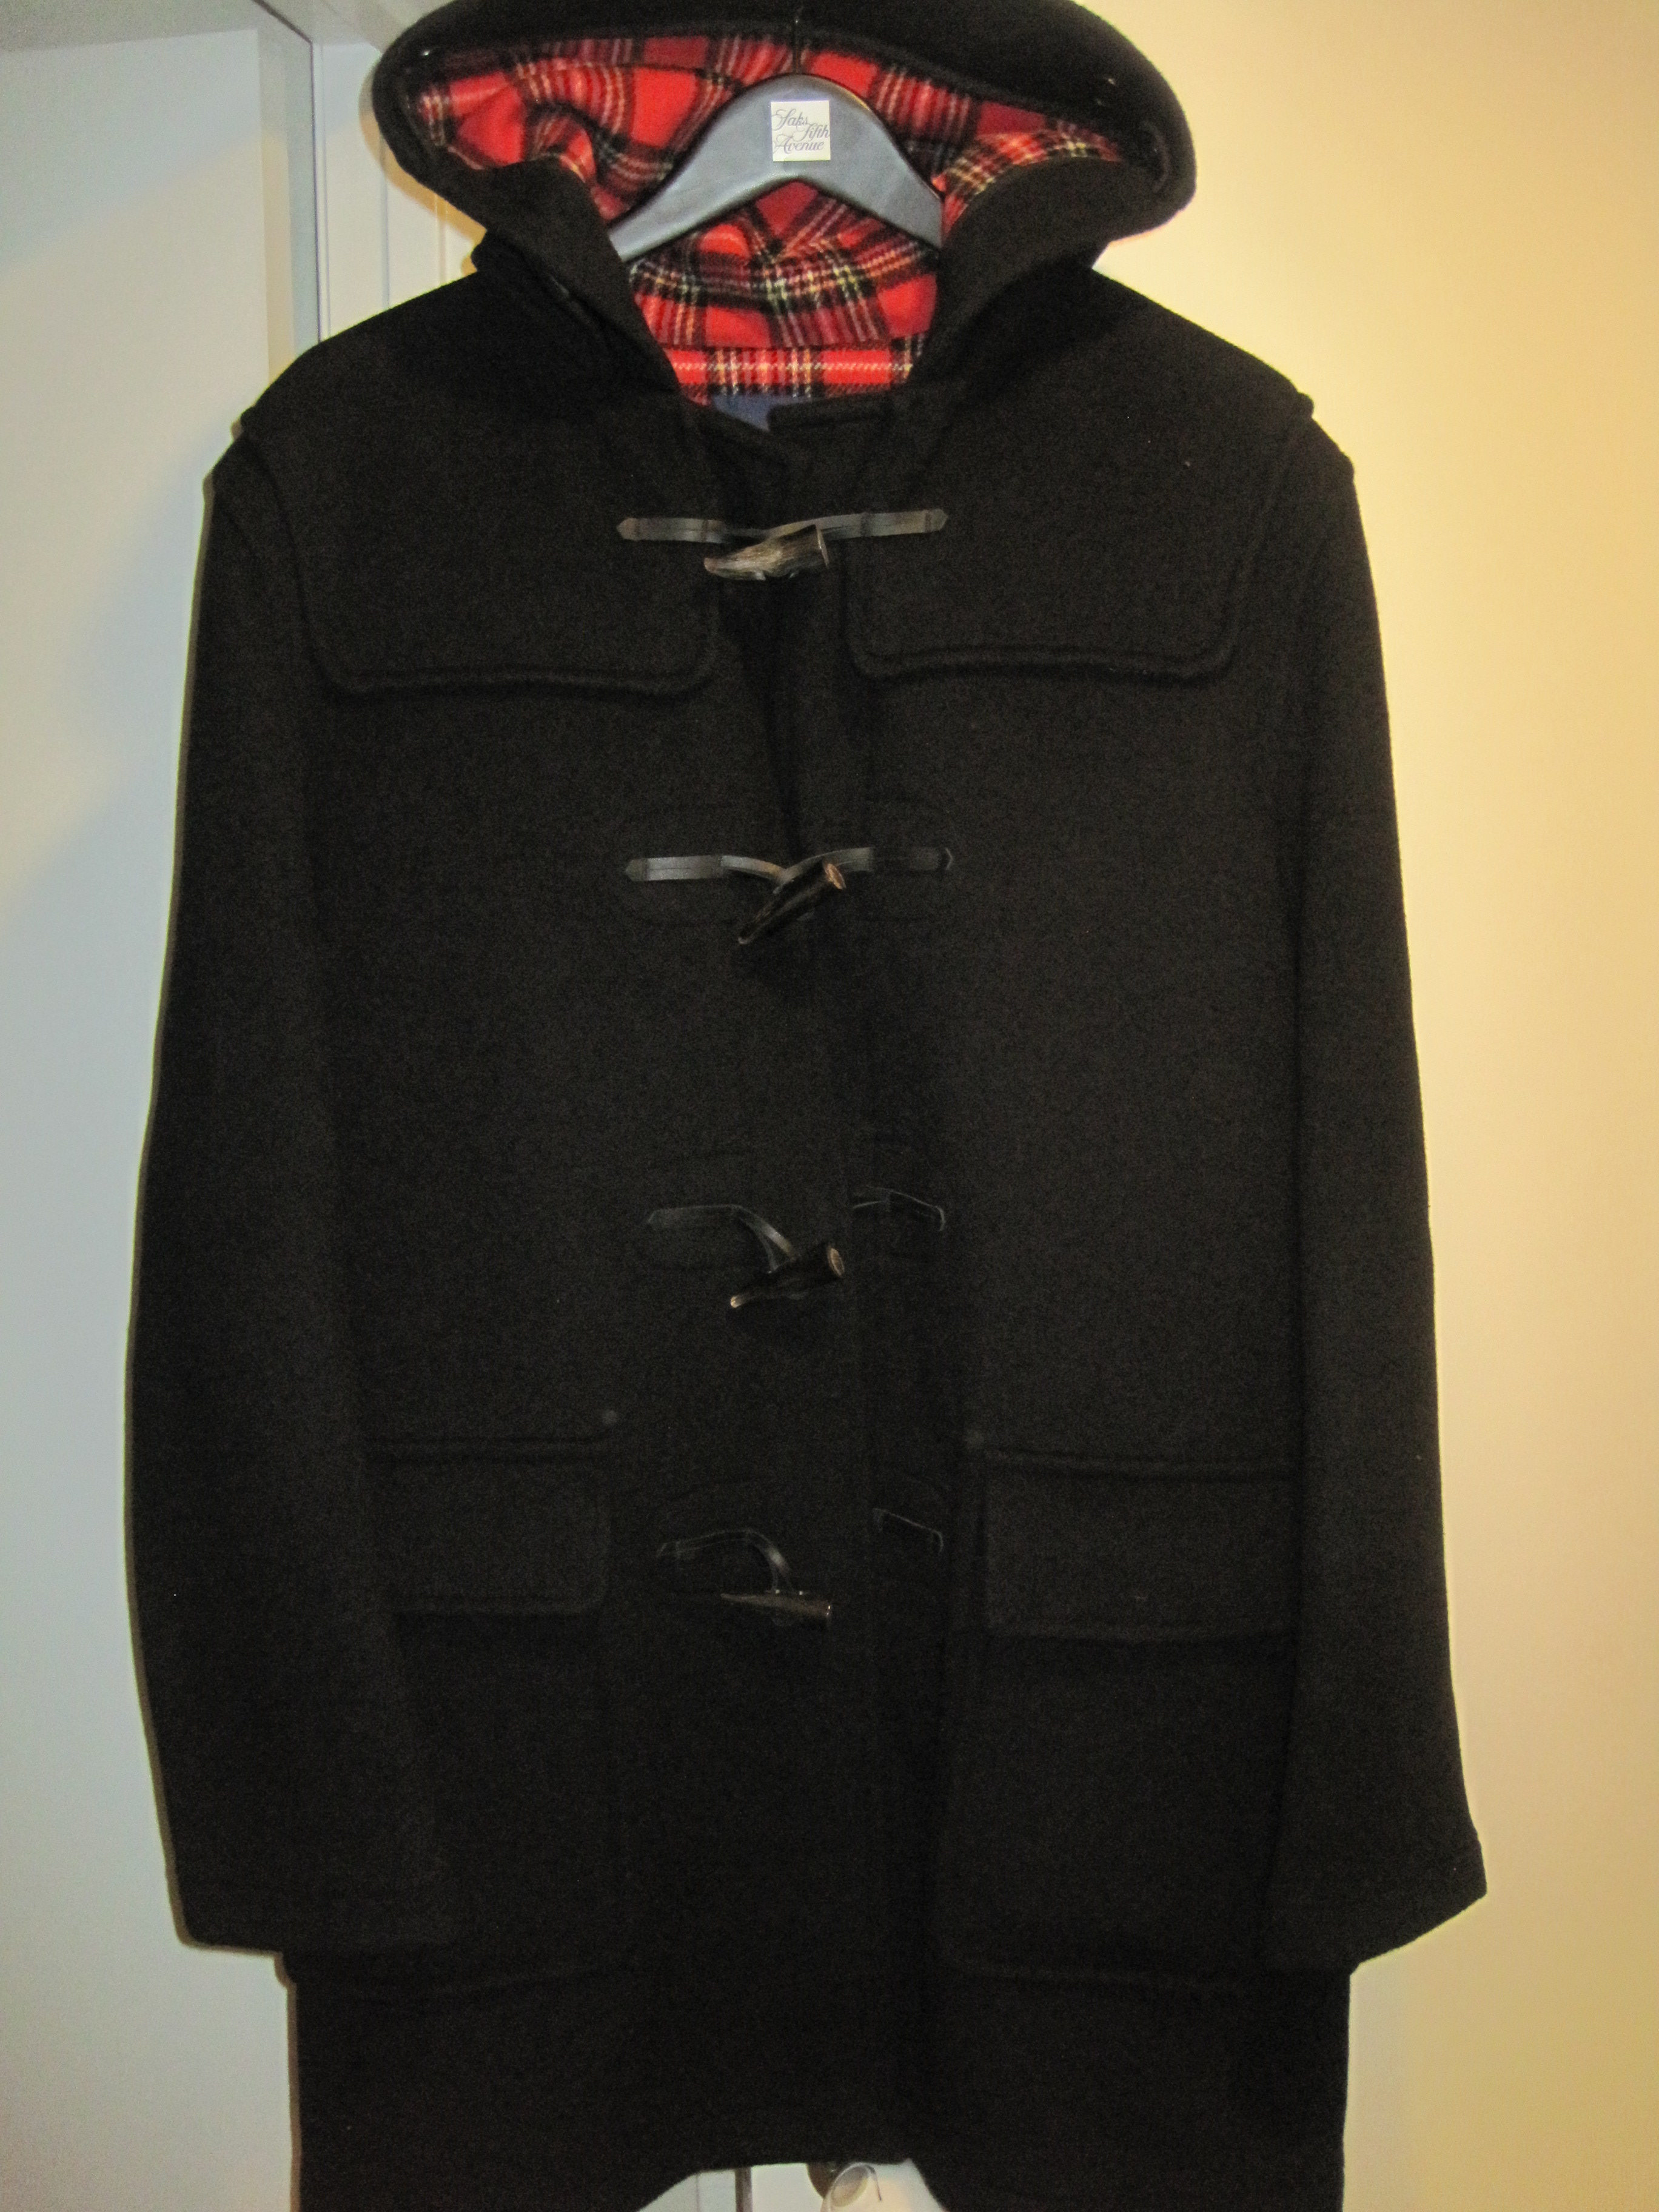 NWT Fred Perry x Gloverall Black Wool Duffle Coat Size 40 Made in England |  Styleforum